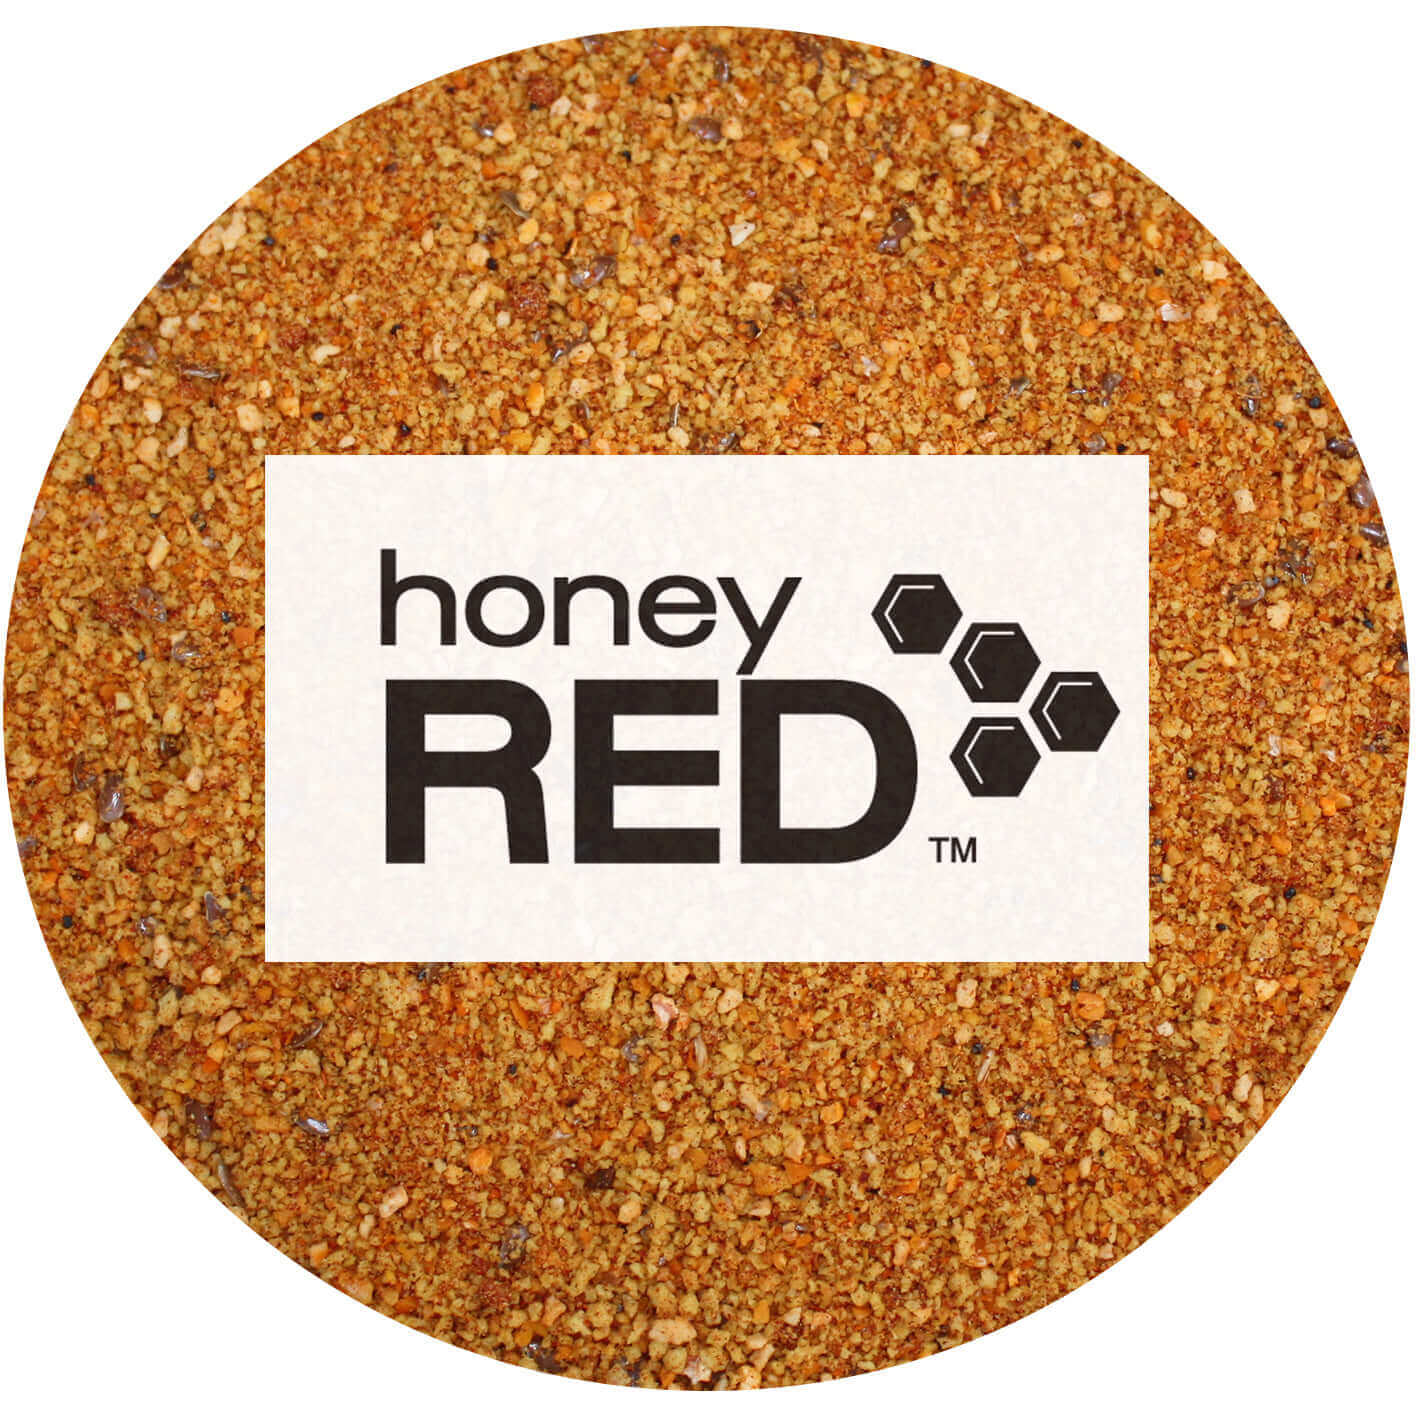 Honey red,fishing bait, the unique honey-based 3 in 1 bait ingredient with genuine Robin Red